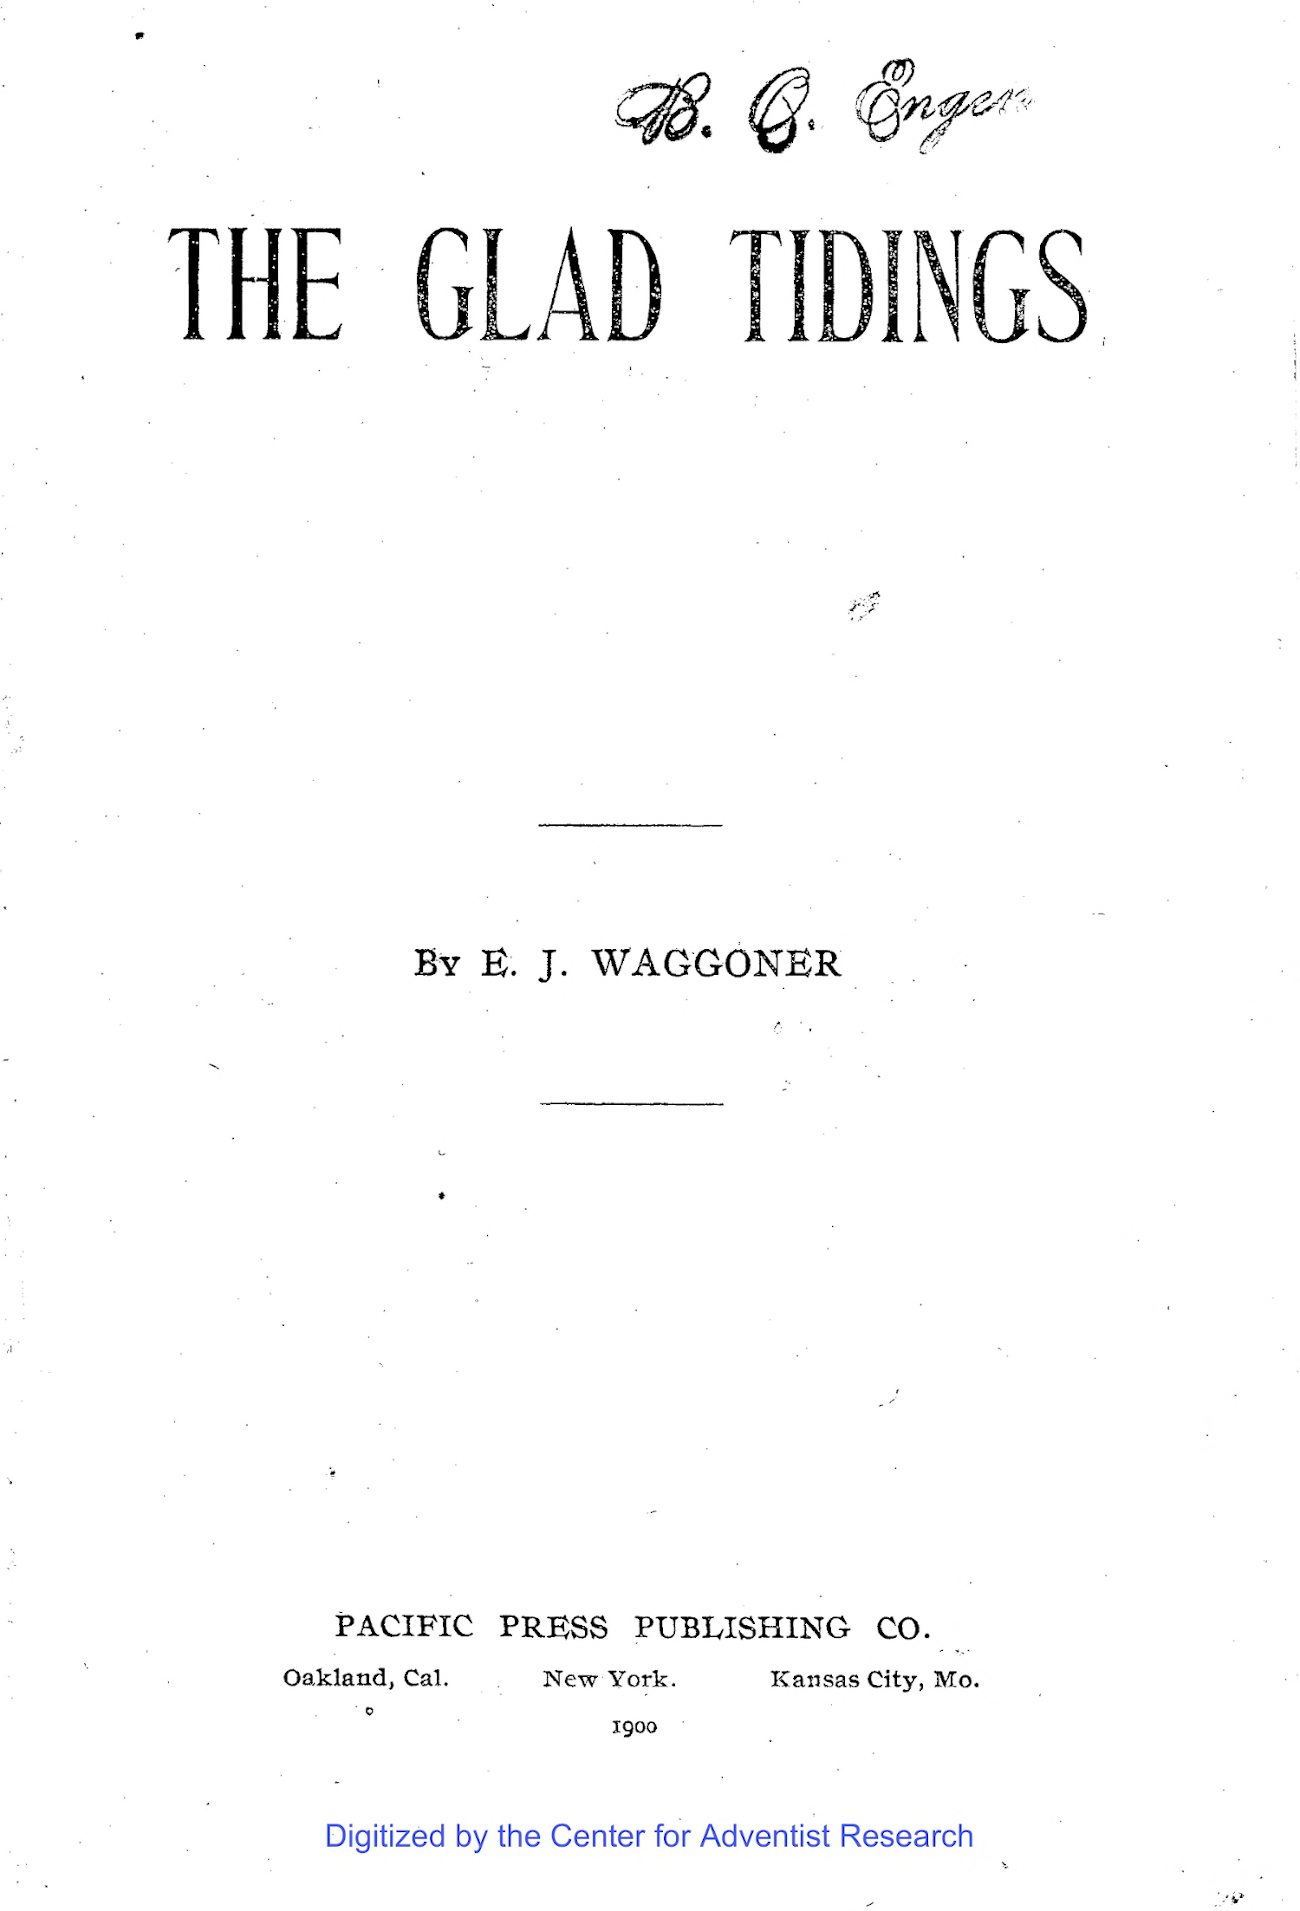 The Project Gutenberg eBook of The Glad Tidings, by Ellet J